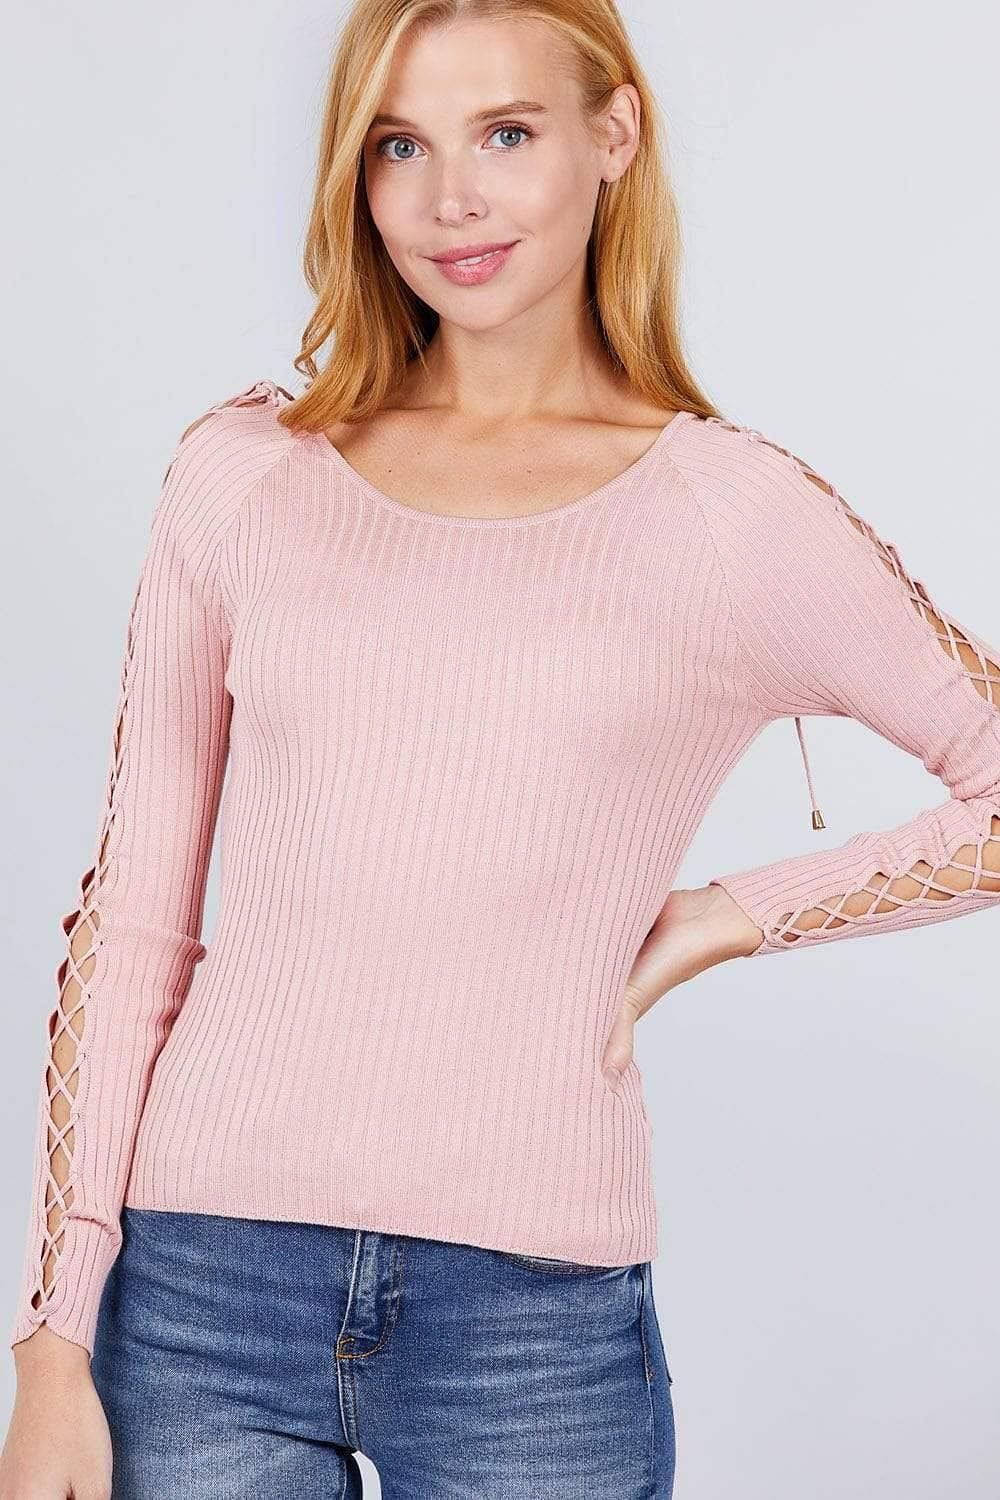 Pink Long Sleeve Scoop Neck Top - Shopping Therapy S Top